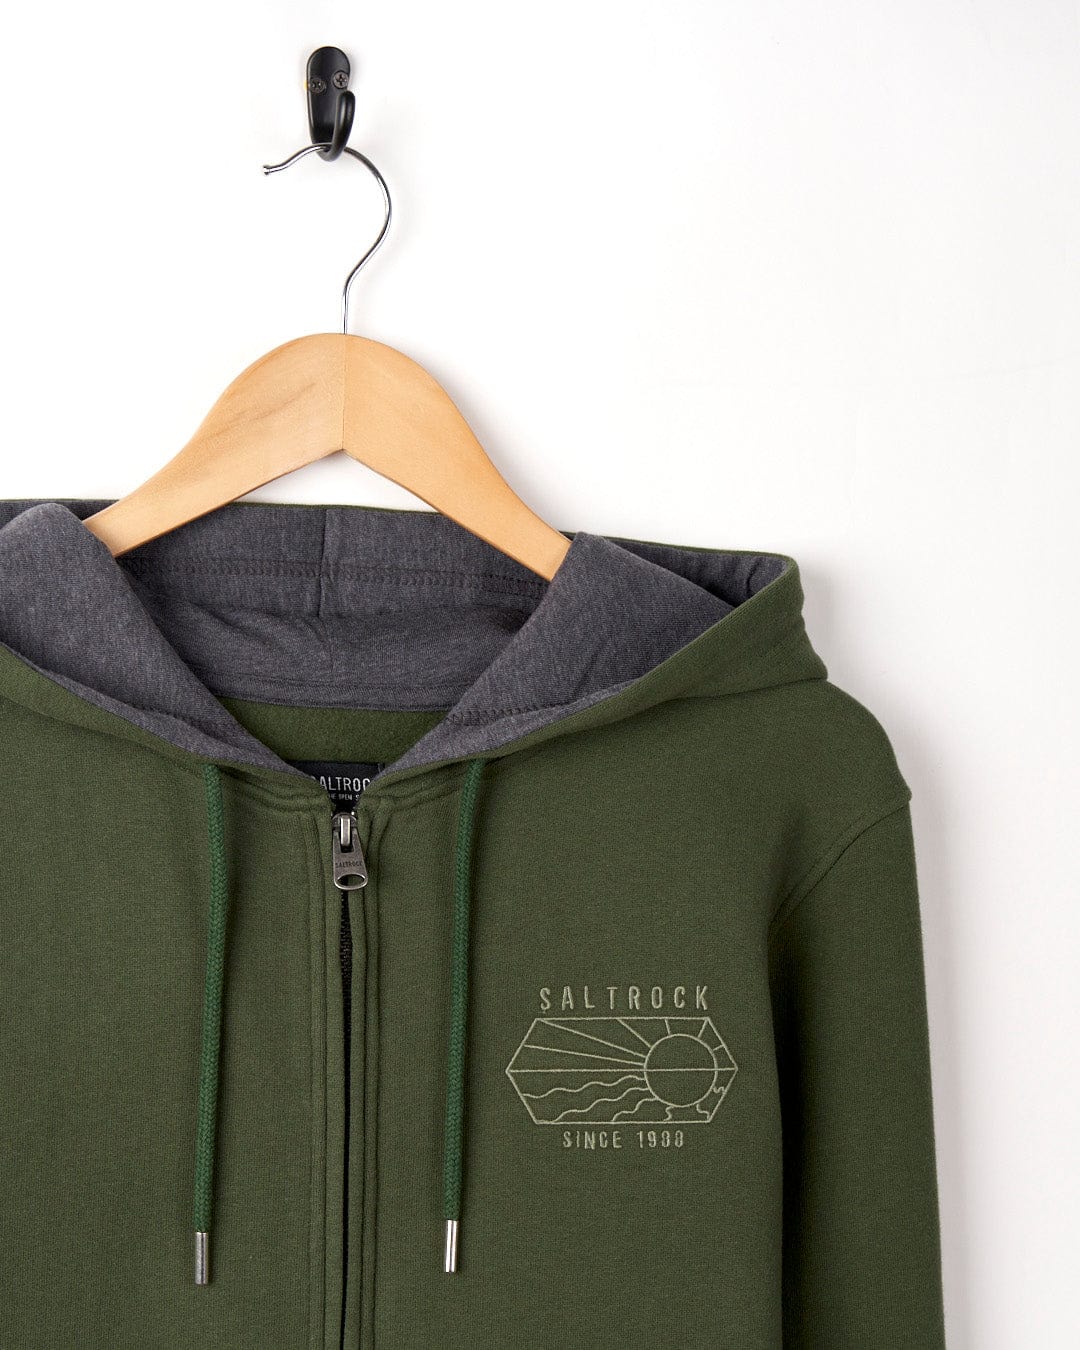 Dark Green Vantage Outline - Recycled Mens Zip Hoodie with white "Saltrock since 1988" embroidered branding, hanging on a wooden hanger against a white background.